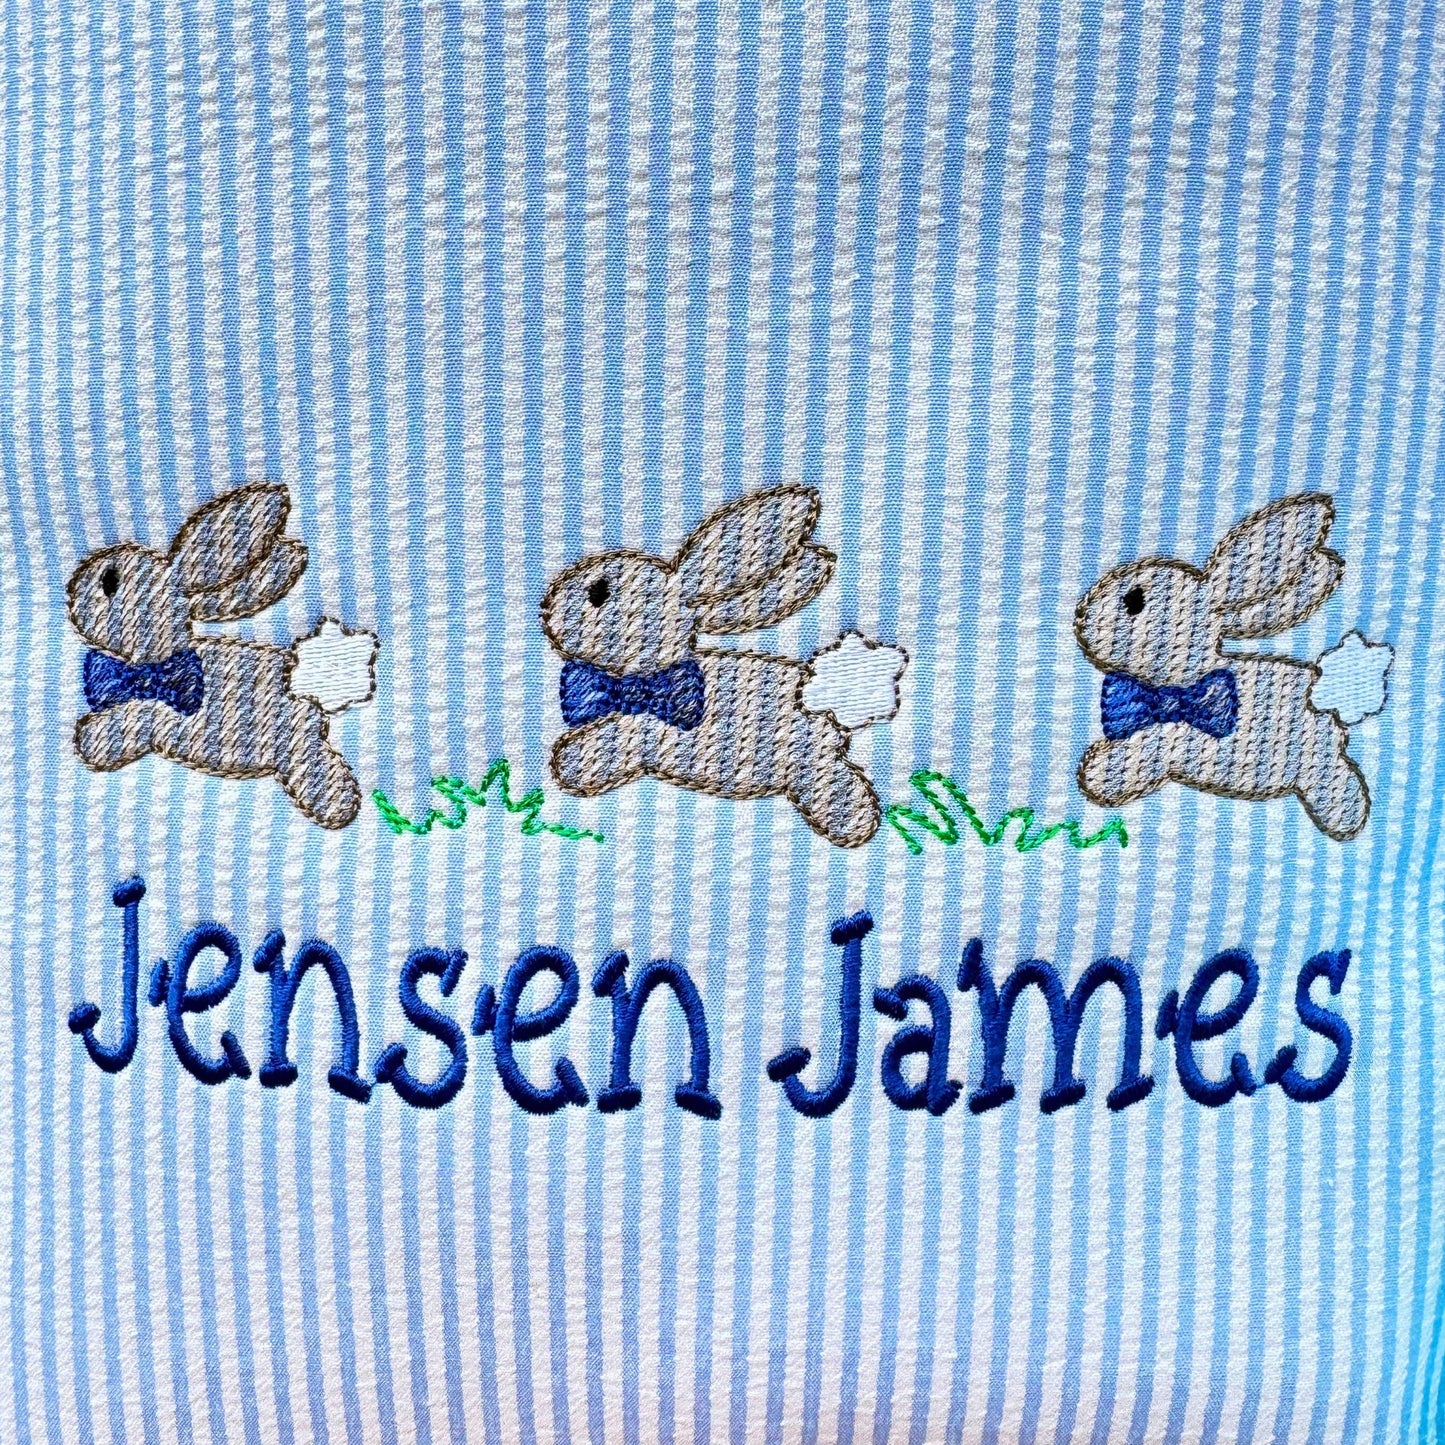 Personalized Custom Embroidered Striped Easter Bag Basket Bucket Tote Blue or Pink Three Bunny with Bow Design Kid’s Gift for Boy or Girl